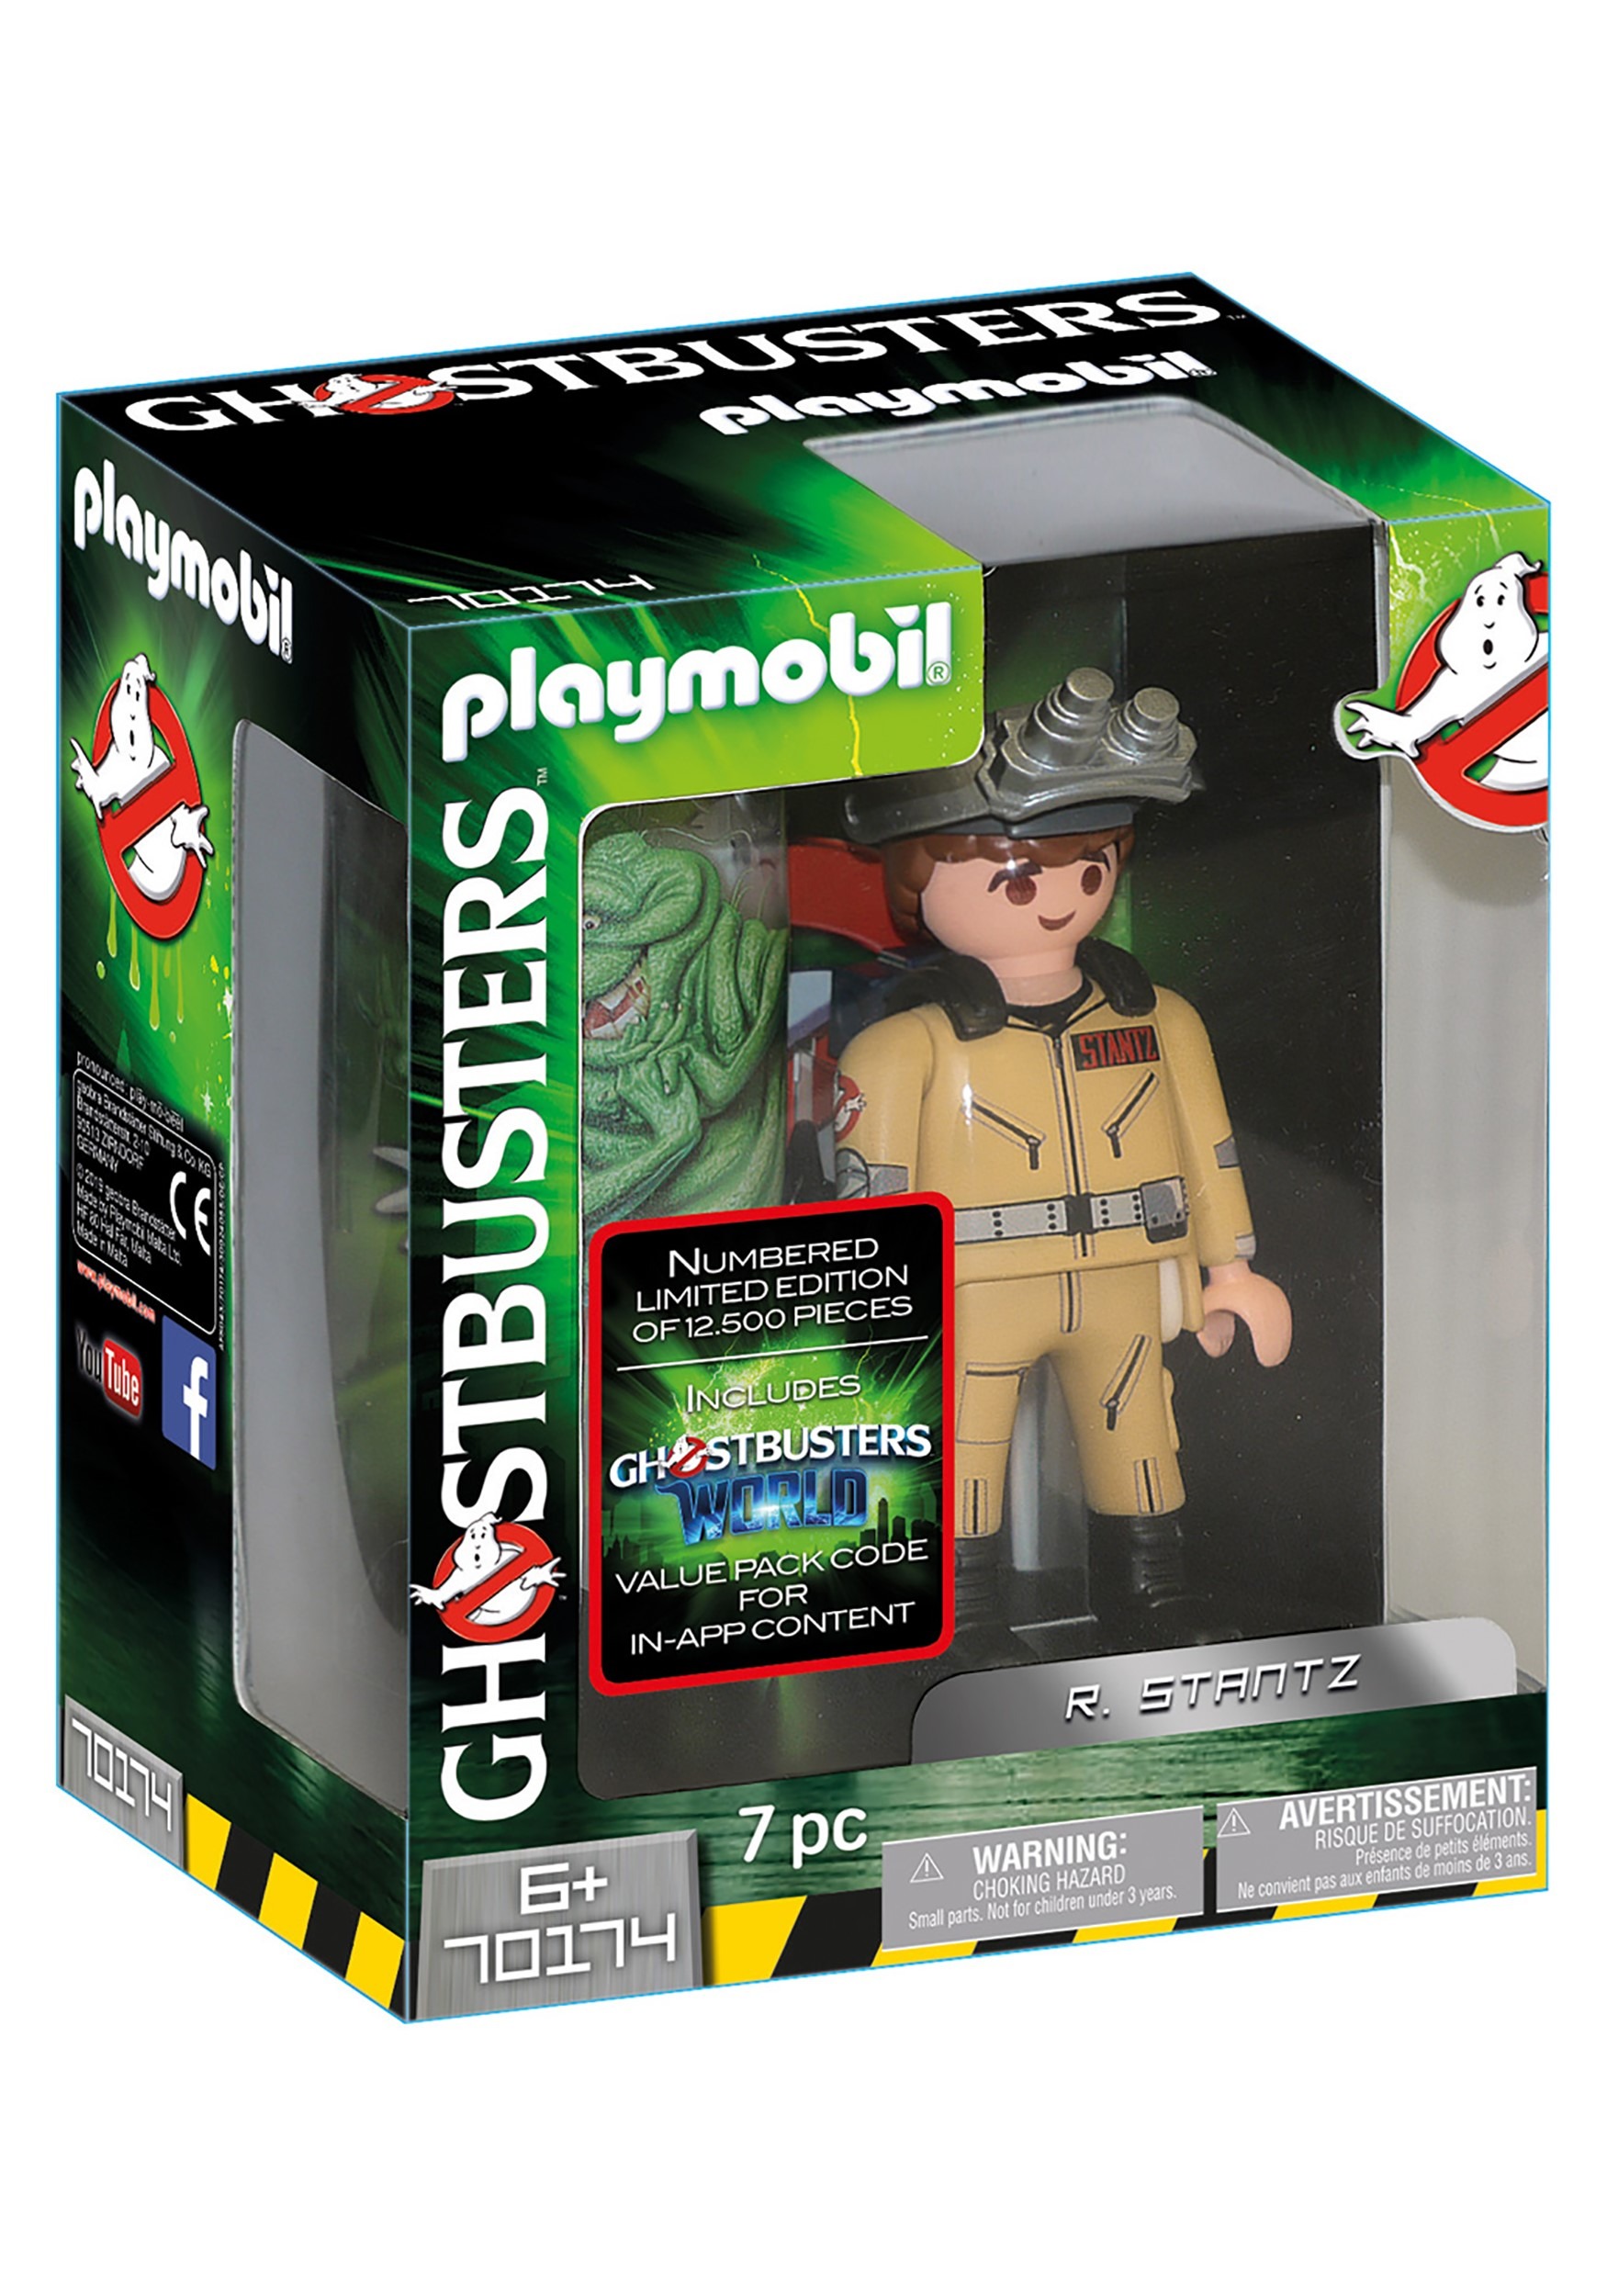 6 Inch Ghostbusters Playmobil Collectors Edition R. Stantz Figure